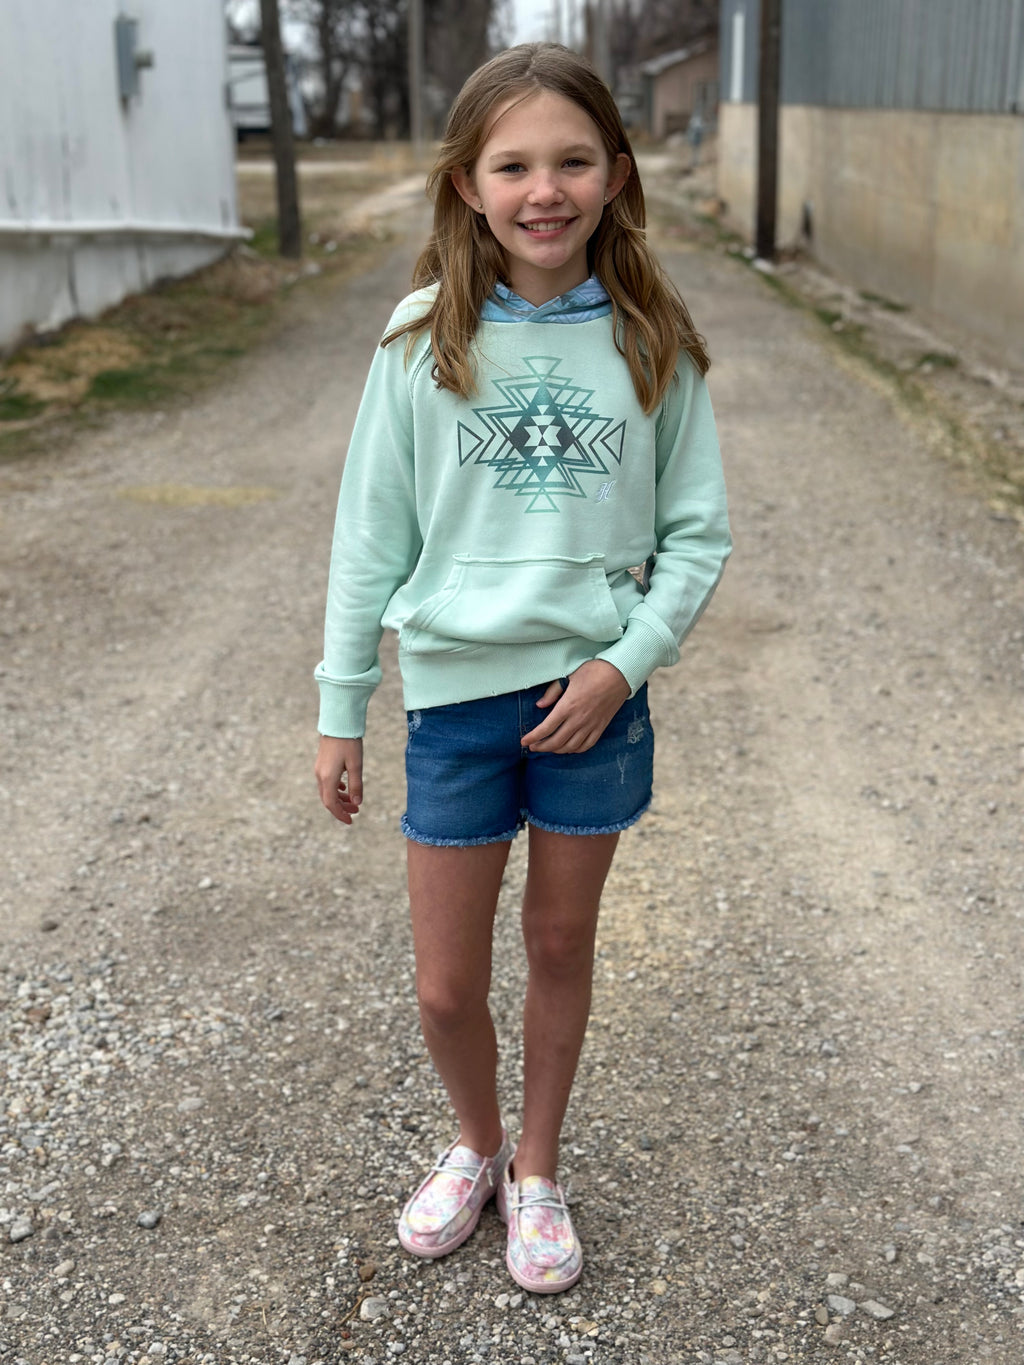 Hooey l Youth Girls Chaparral Teal Hoody with Aztec Design